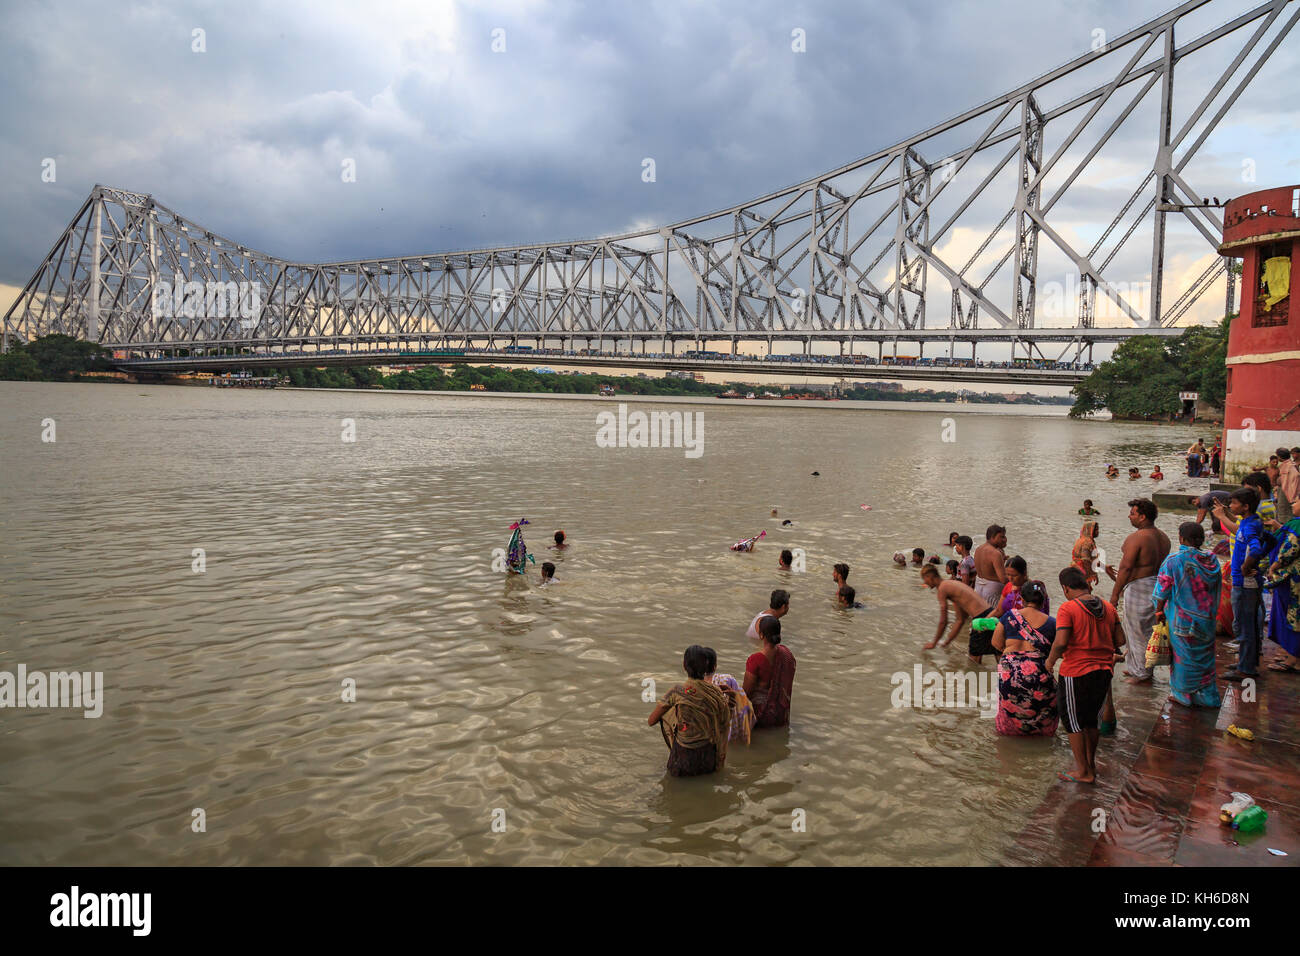 Howrah bridge - The historic cantilever bridge on river Hooghly with view of people at the adjoining river bank at Kolkata, India. Stock Photo